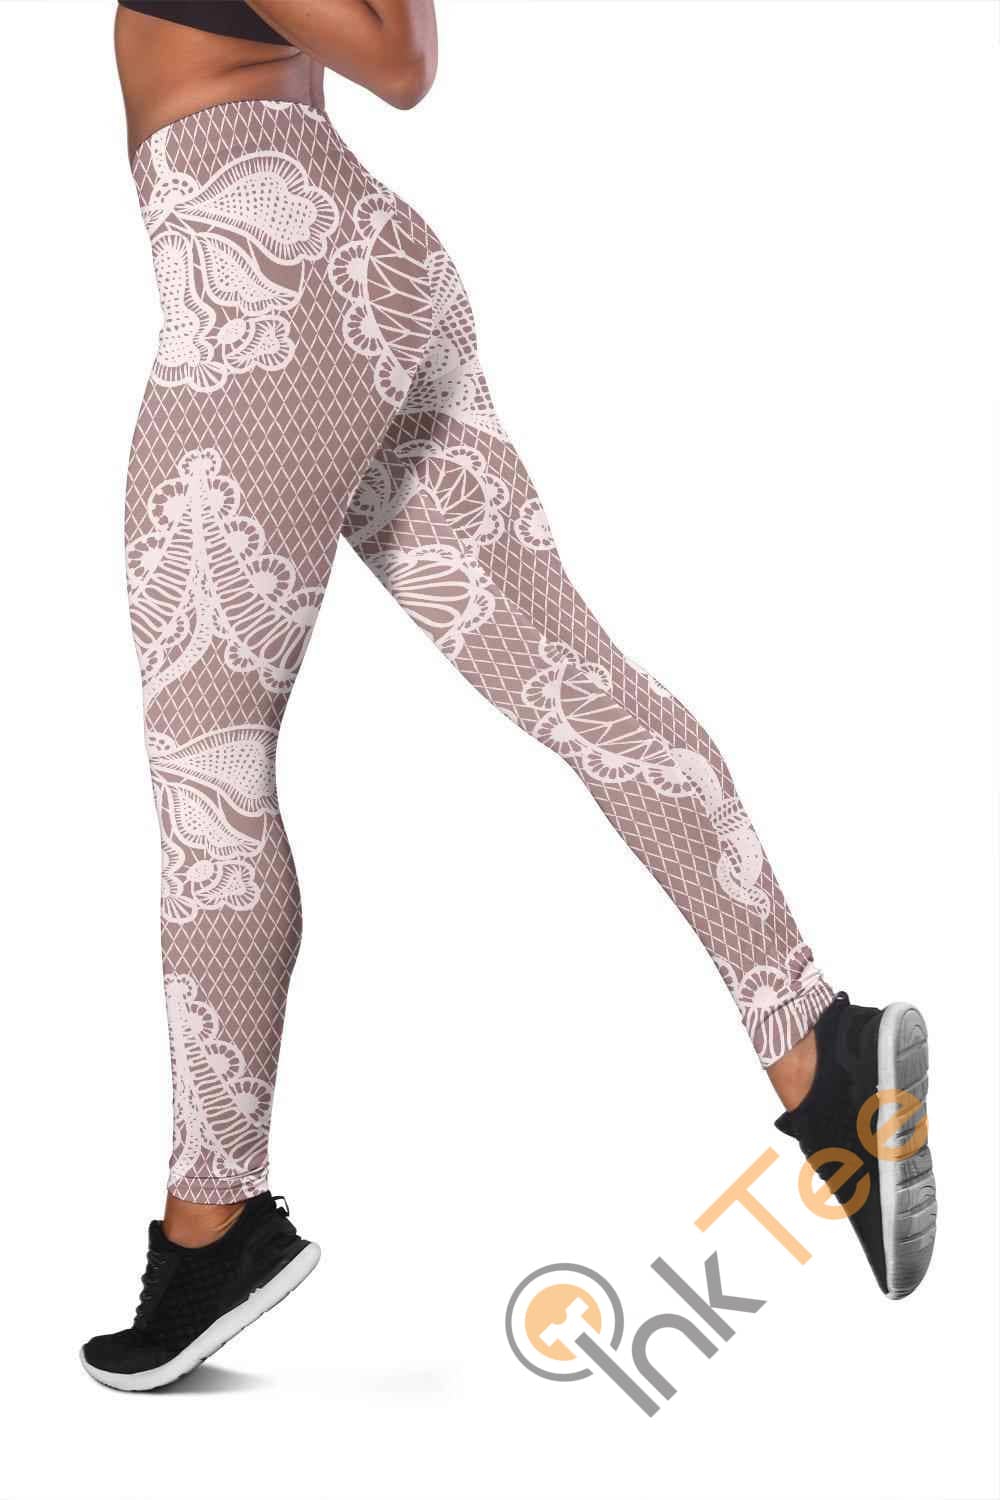 Inktee Store - All Over Lace 3D All Over Print For Yoga Fitness Women'S Leggings Image